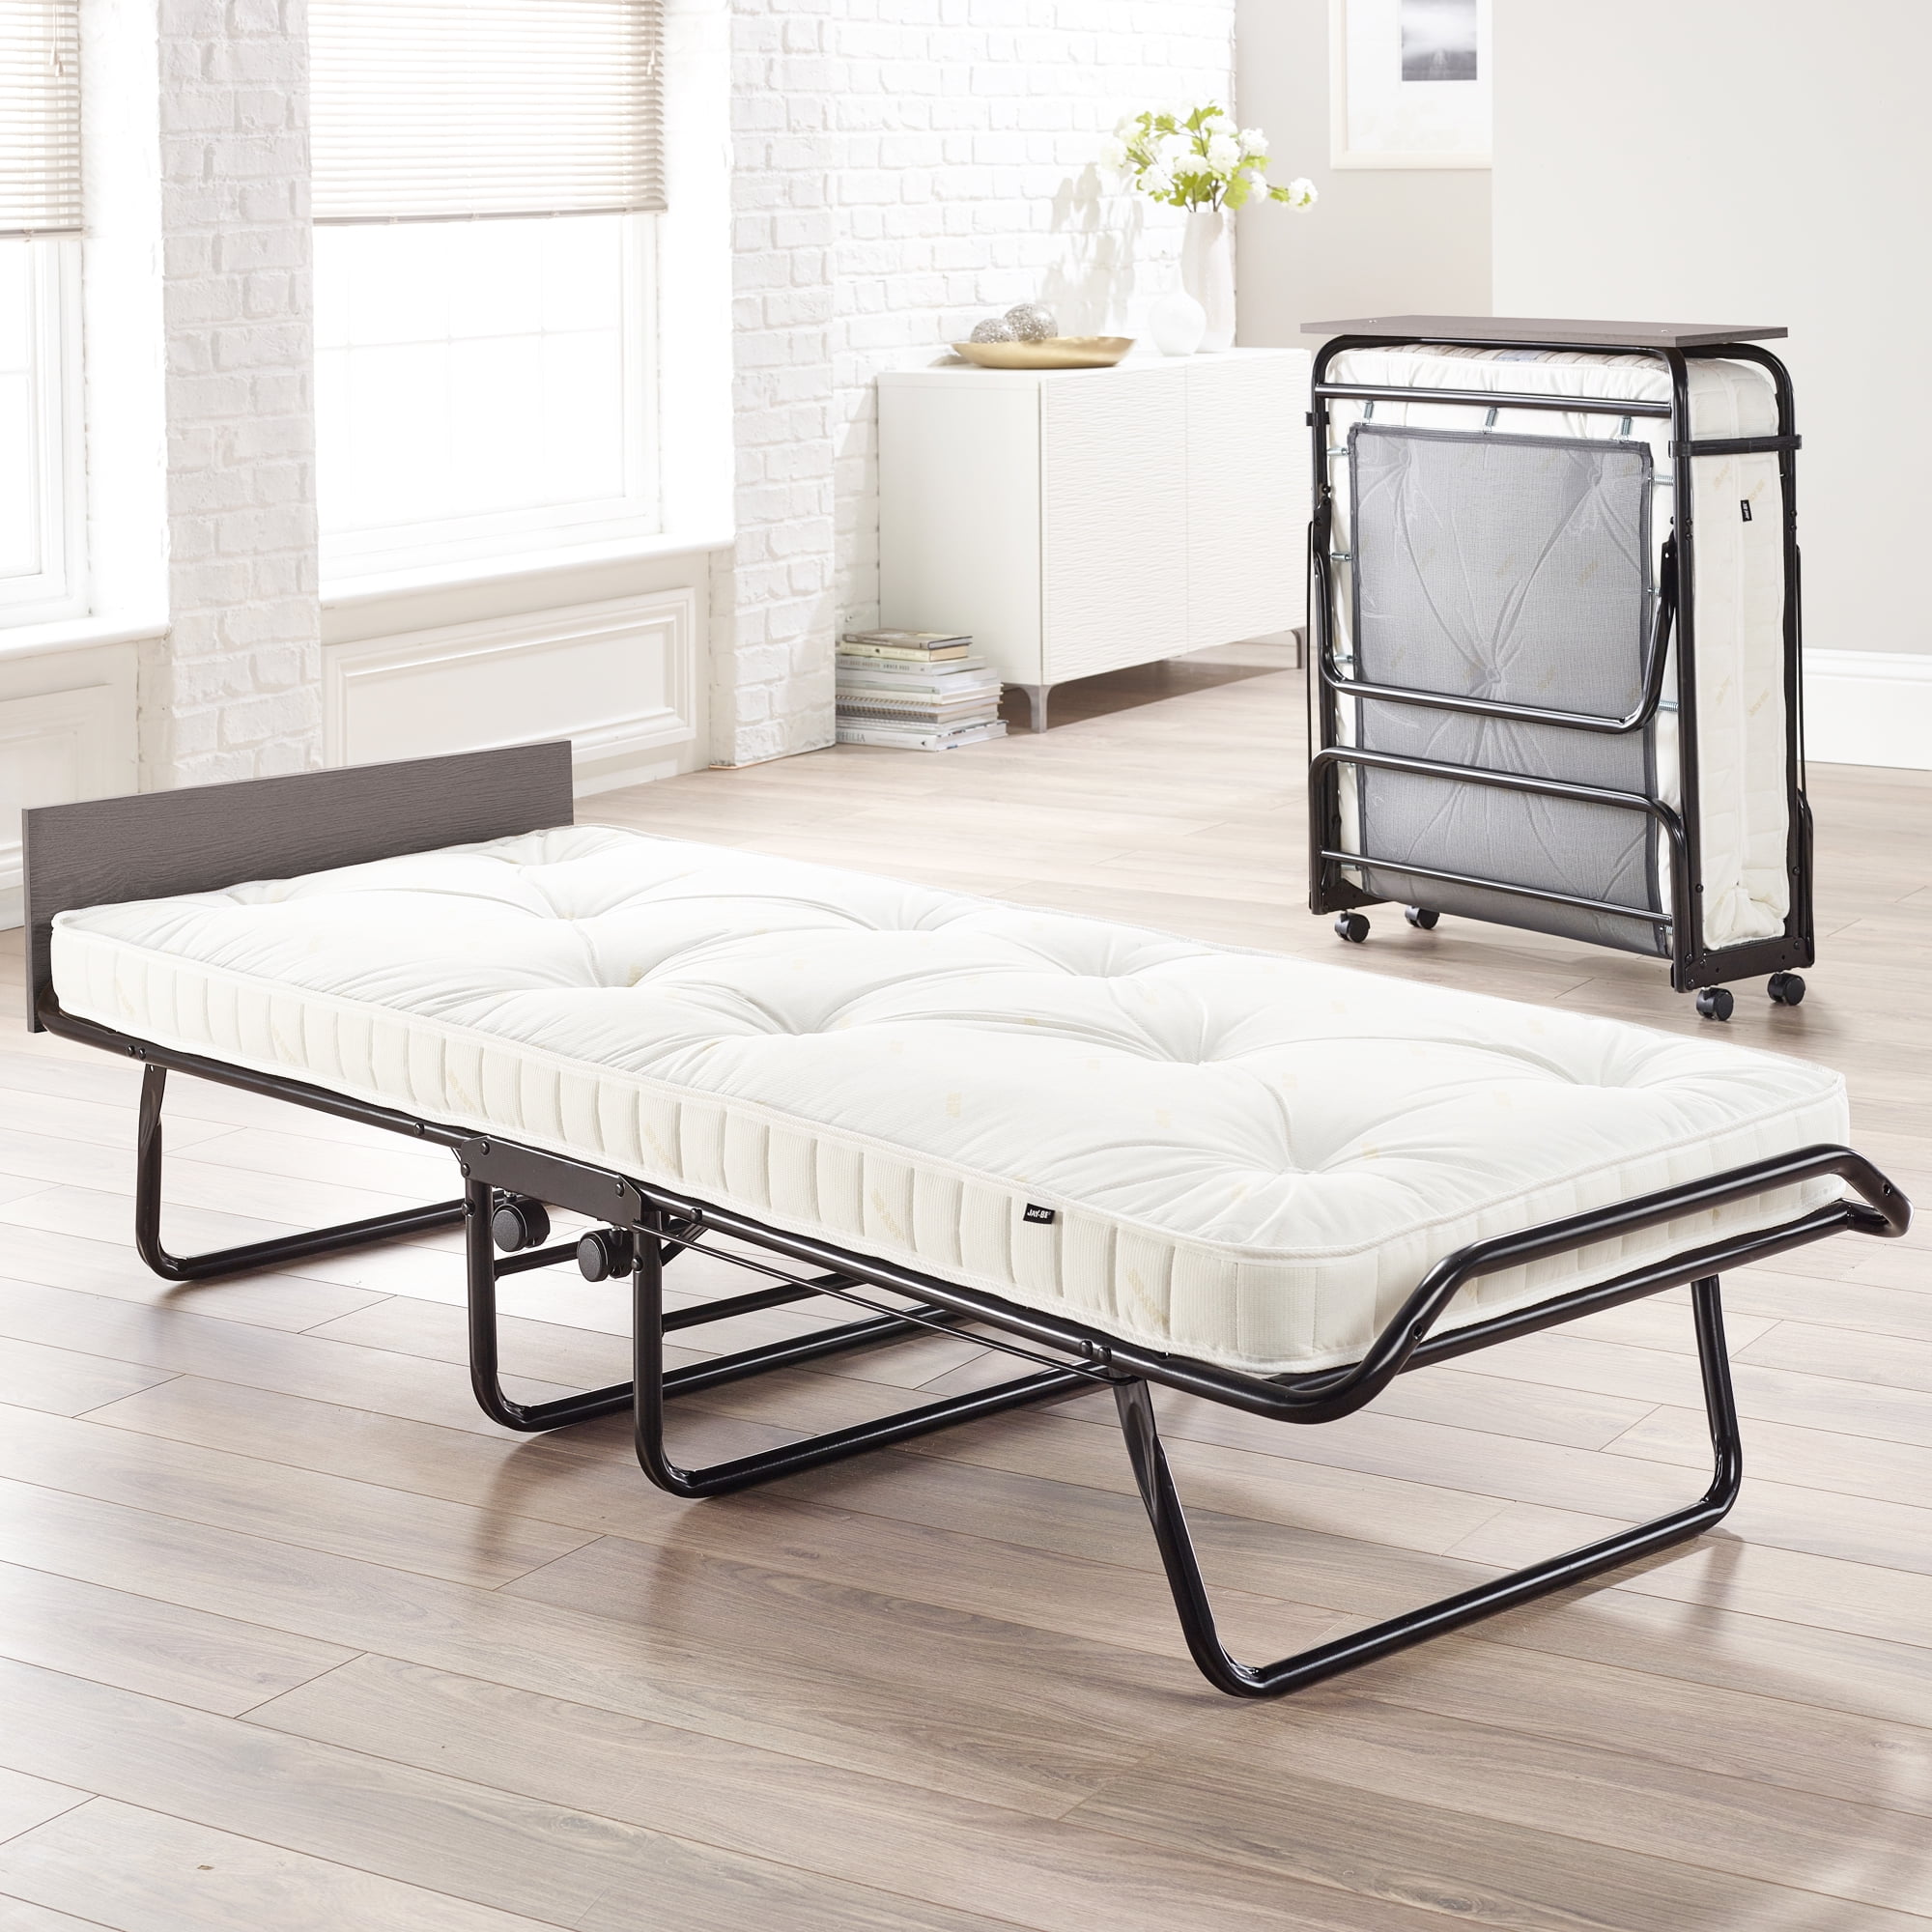 Jay-Be Visitor Folding Cot Guest Bed With Micro E-Pocket Spring ...